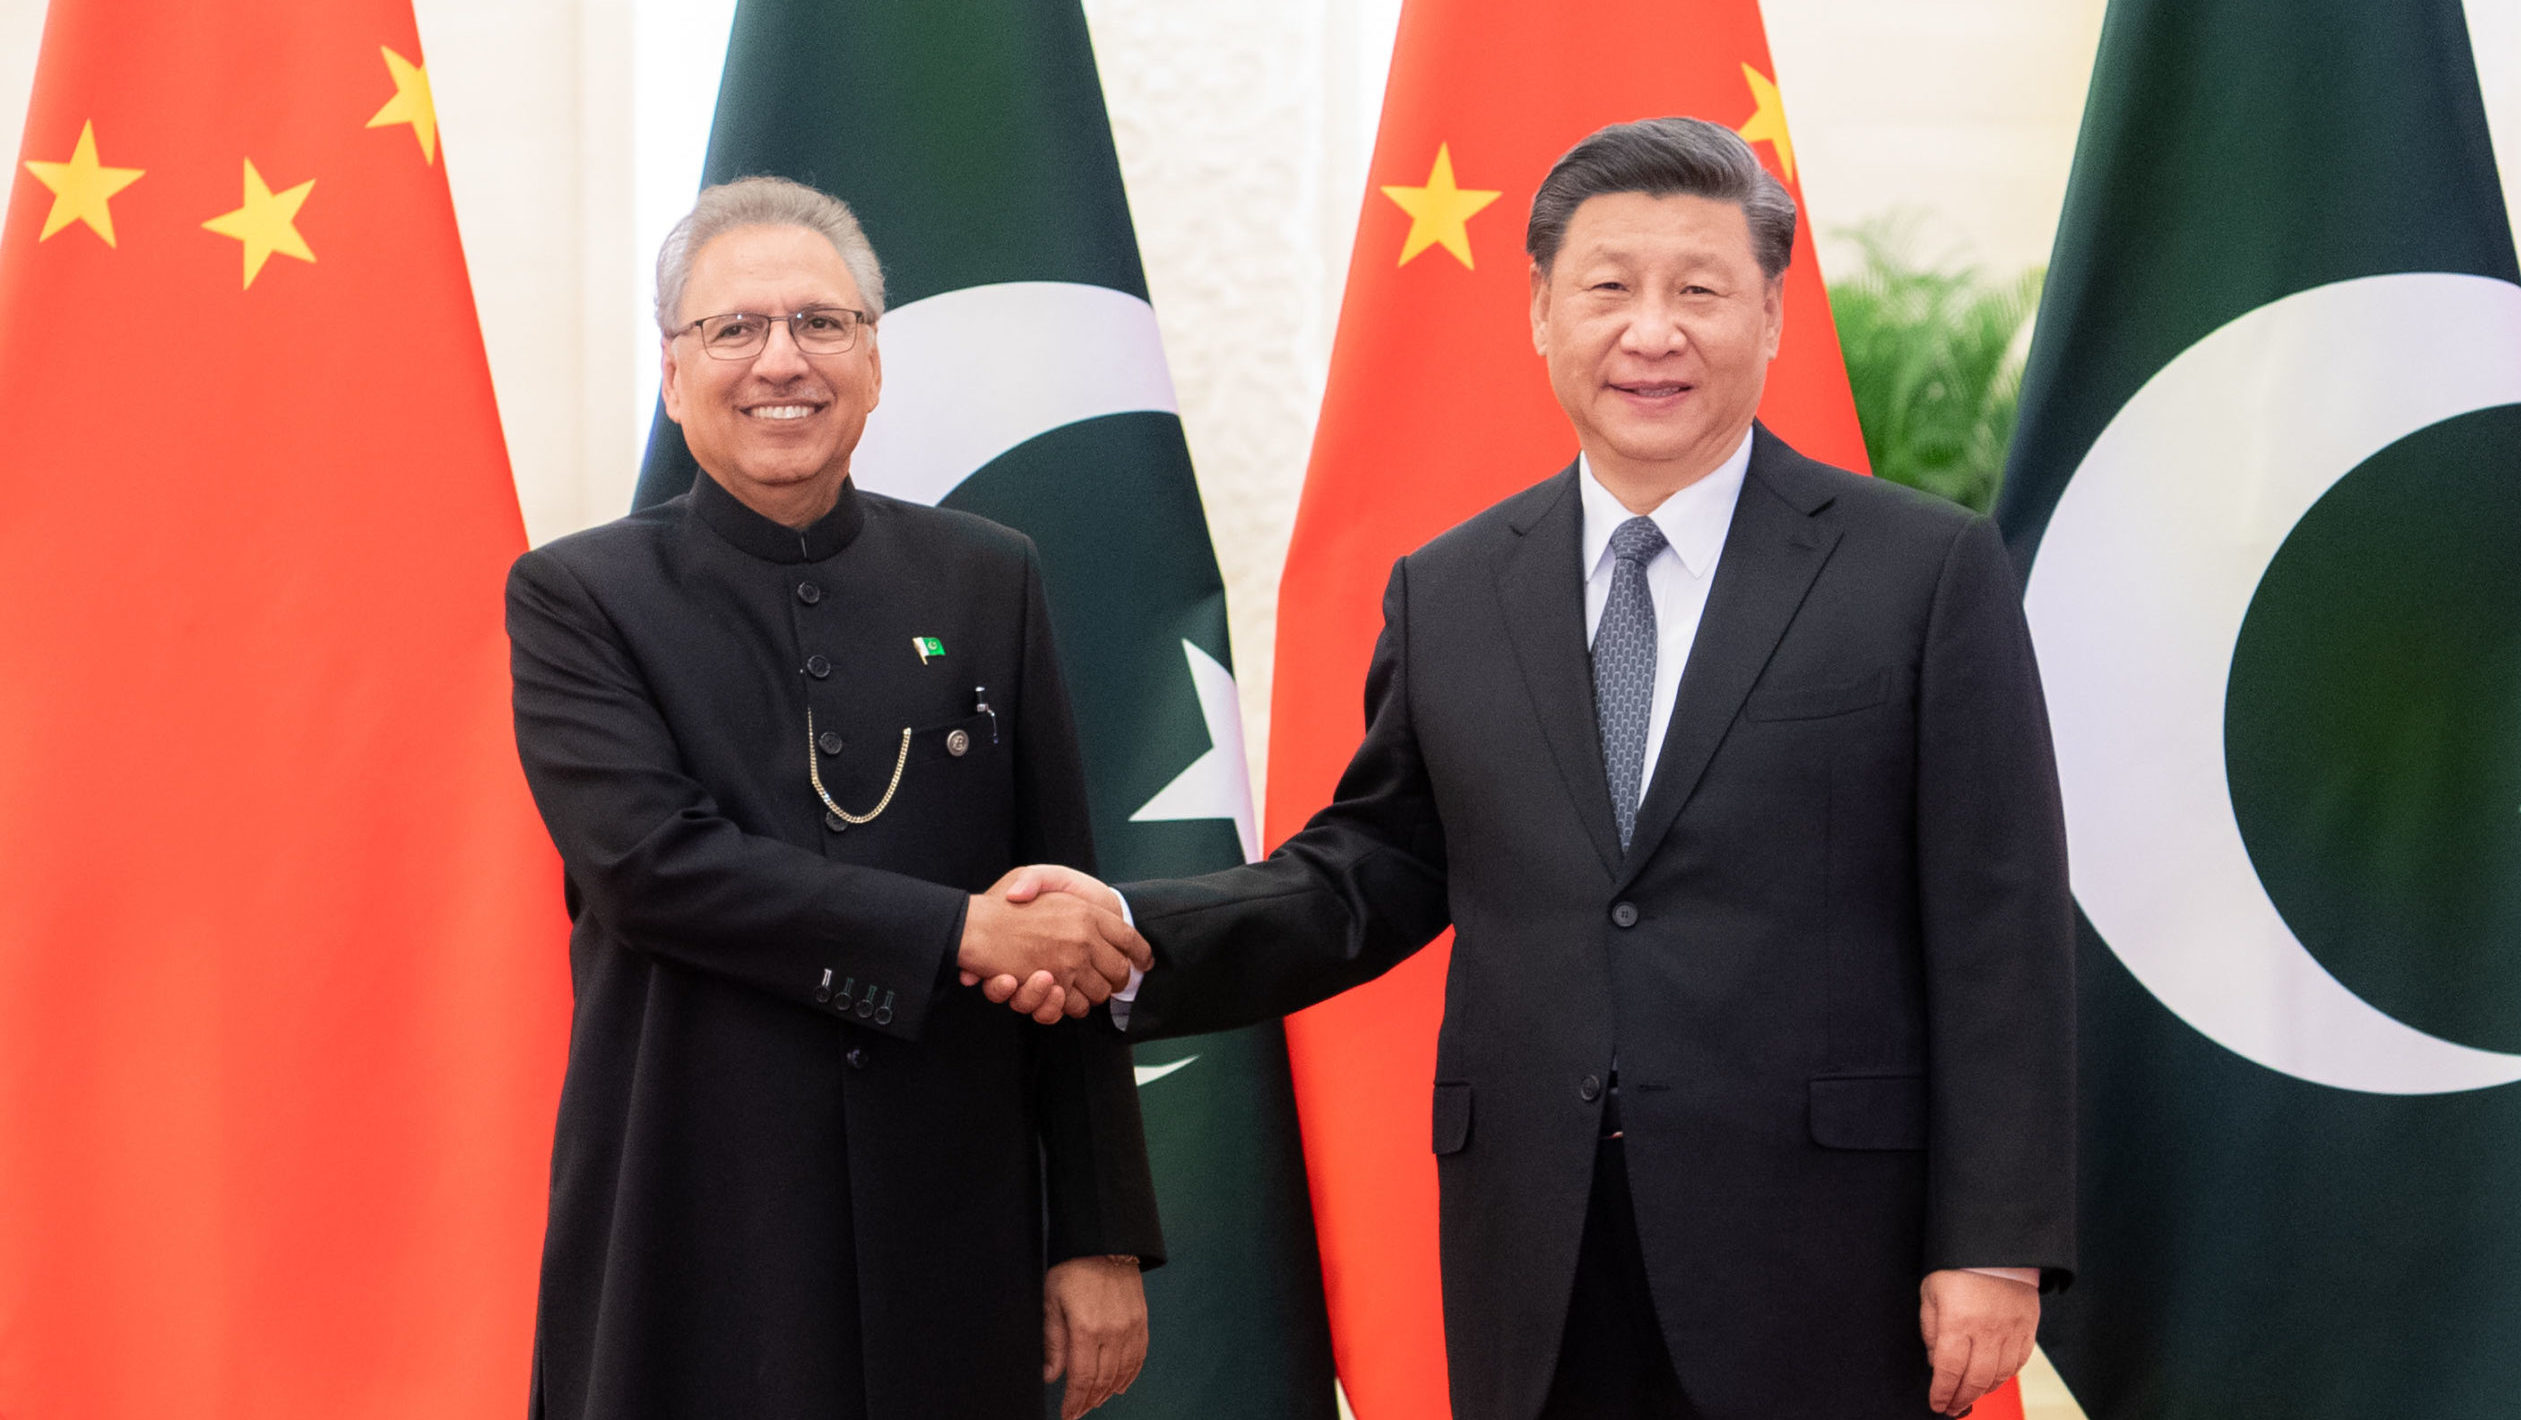 Pakistan’s President Pays Solidarity Visit to China